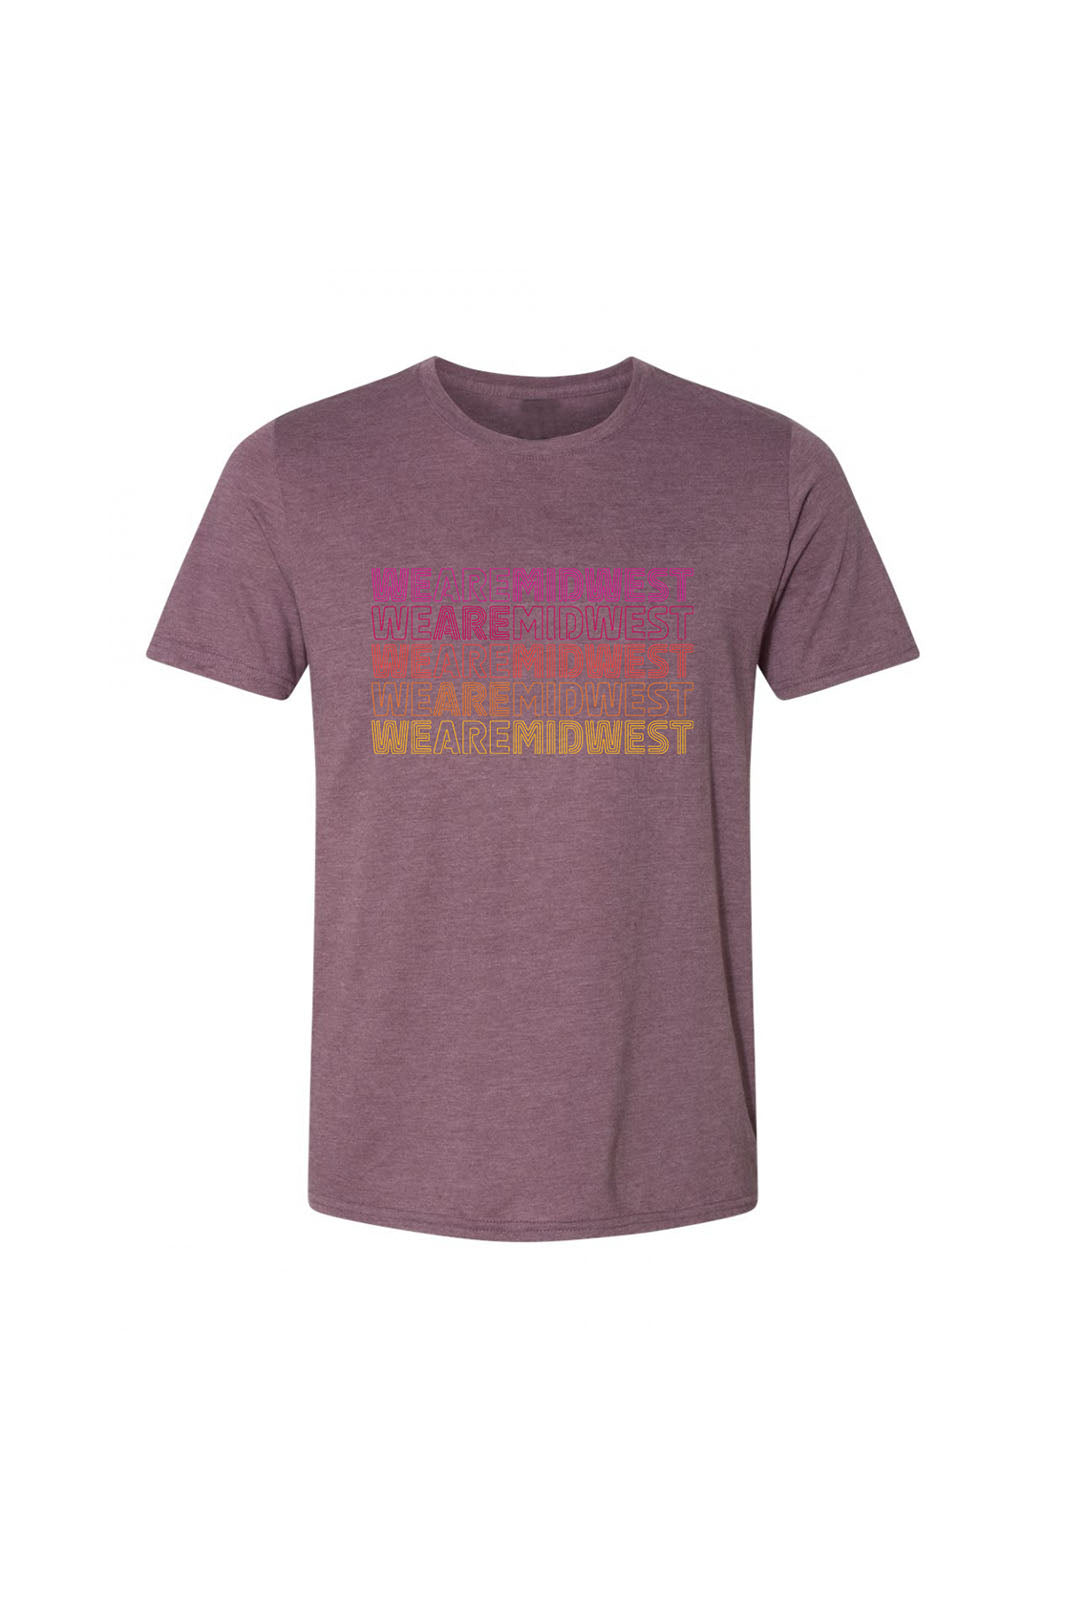 We Are Midwest T-Shirt - Plum